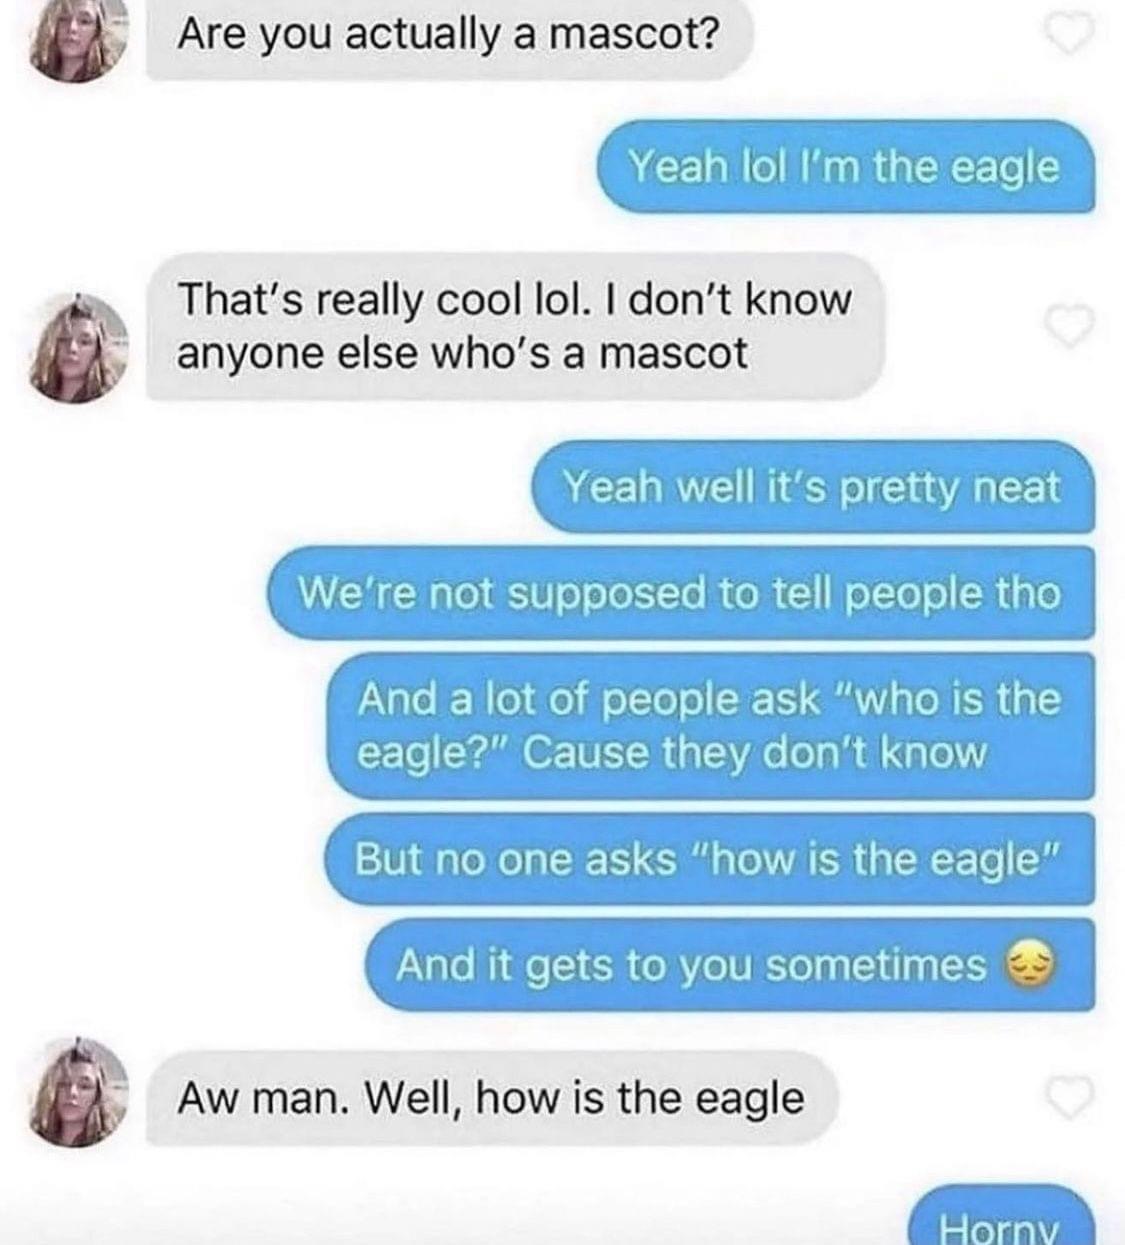 are you actually a mascot, yea lol i’m the eagle, that’s really cool, we’re not supposed to tell people tho, and a lot of people ask, who is the eagle?, but no one asks how is the eagle, how is the eagle?, horny